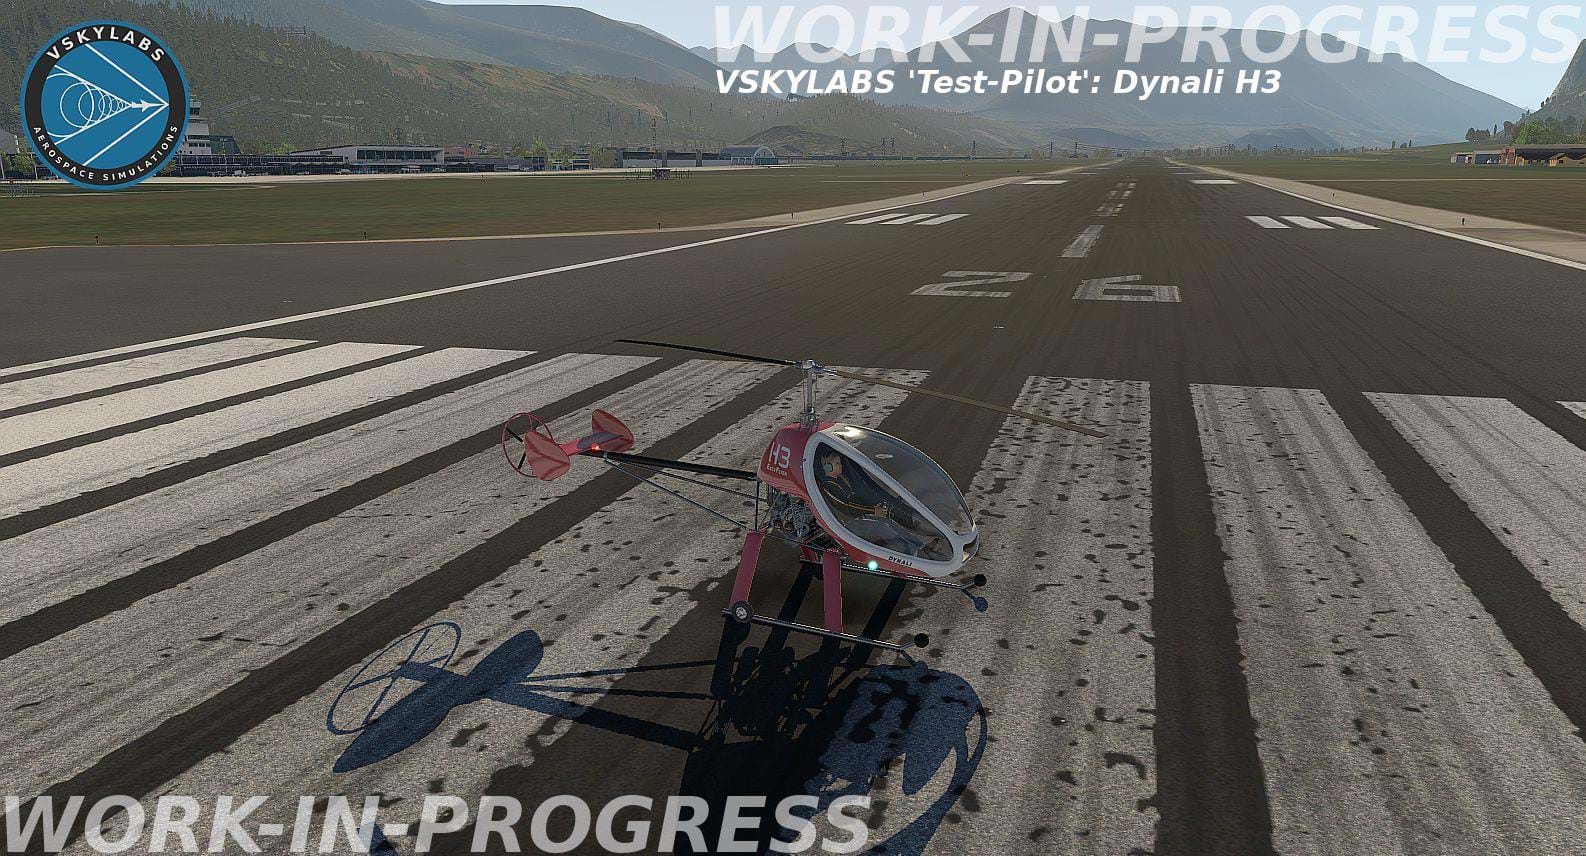 VSKYLABS announces yet another ultralight helicopter for X-Plane